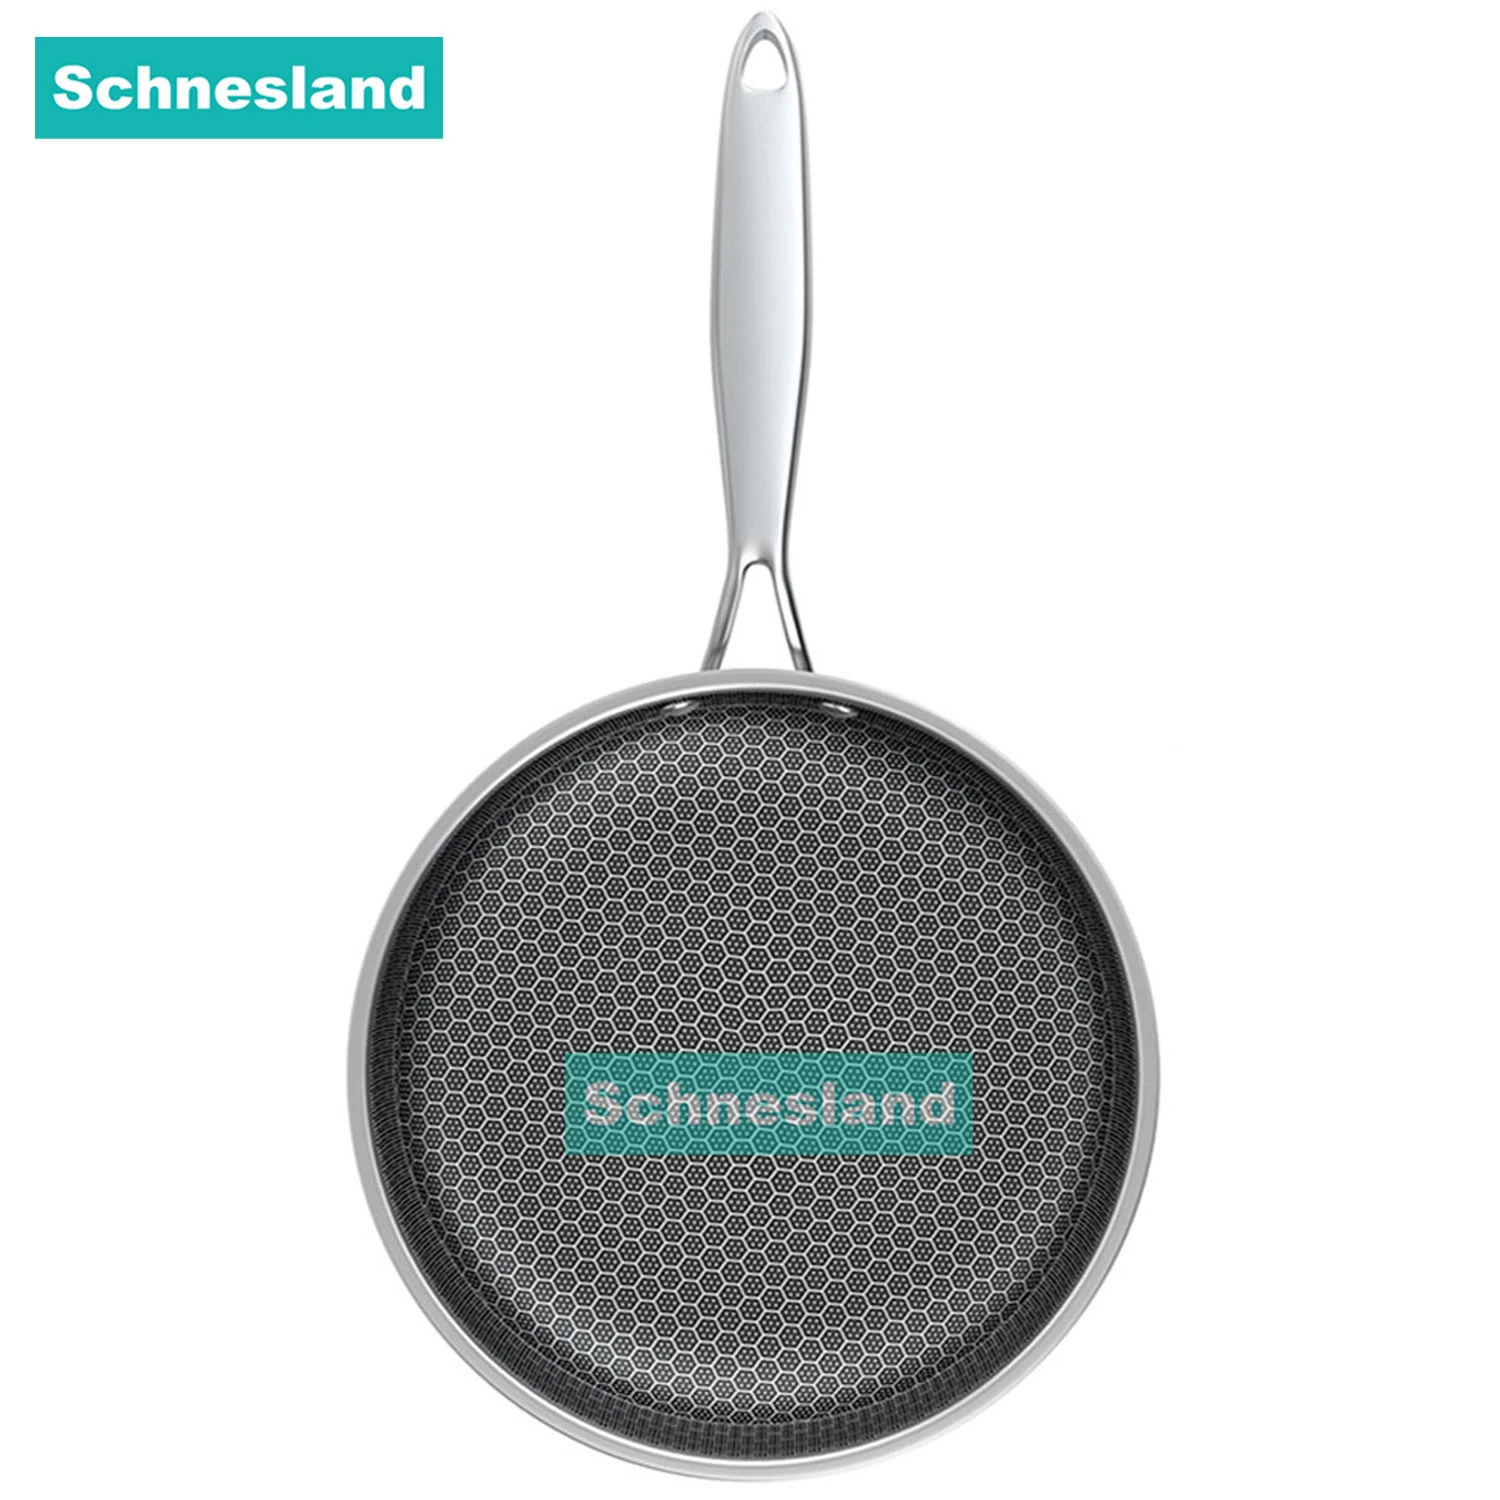 Schnesland Stainless Steel Frying Pans Non-stick Uncoated Skillet Wok Pan